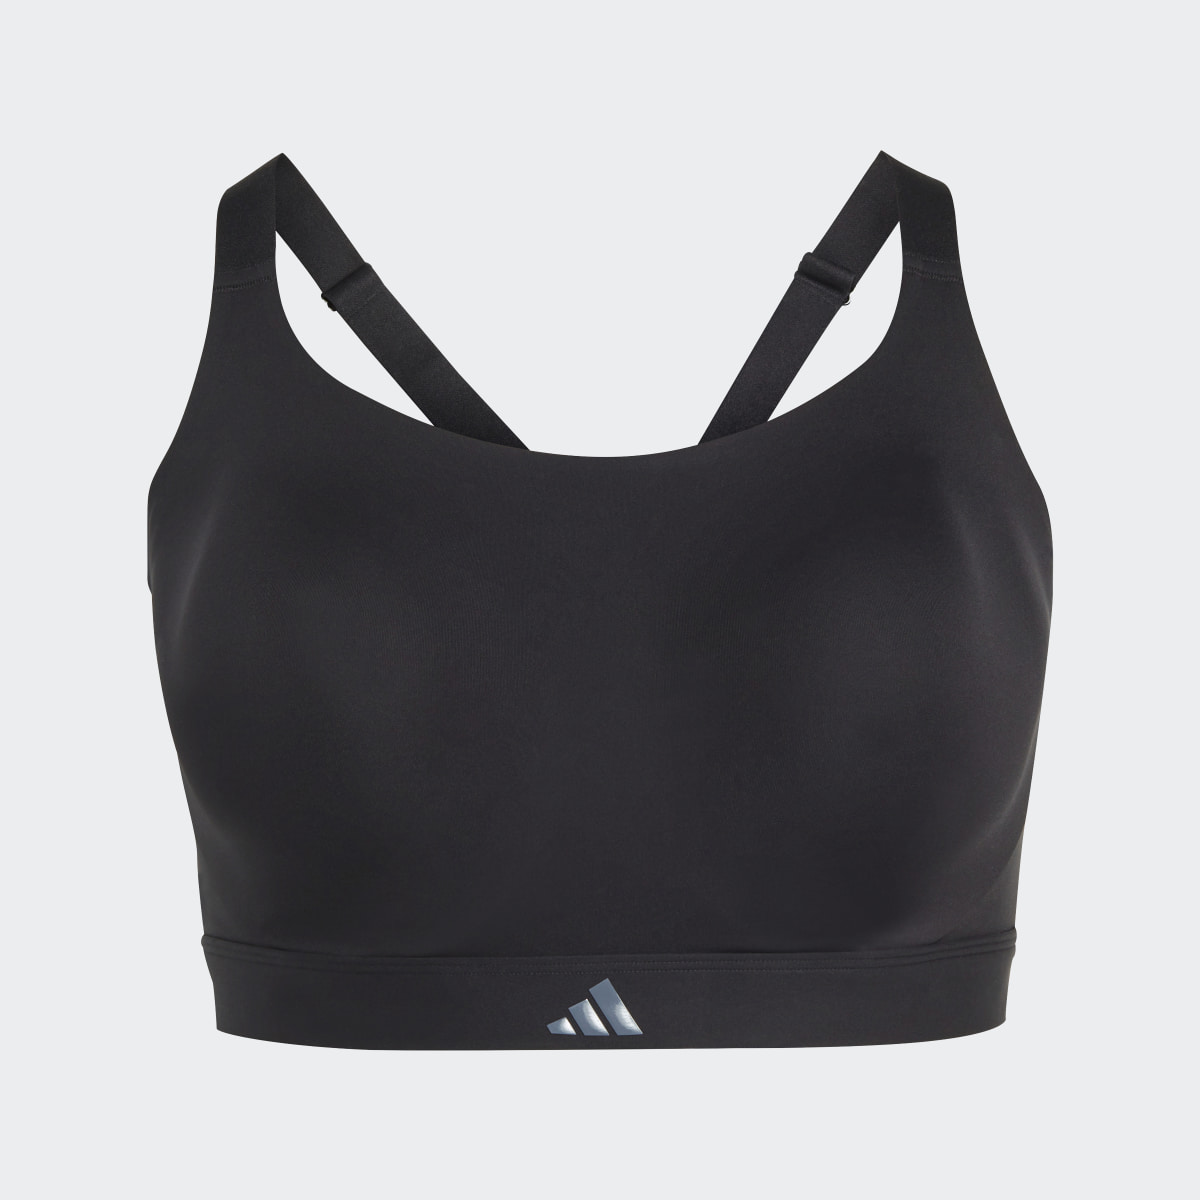 Adidas Brassière de training Tailored Impact Luxe Training Maintien fort (Grandes tailles). 7